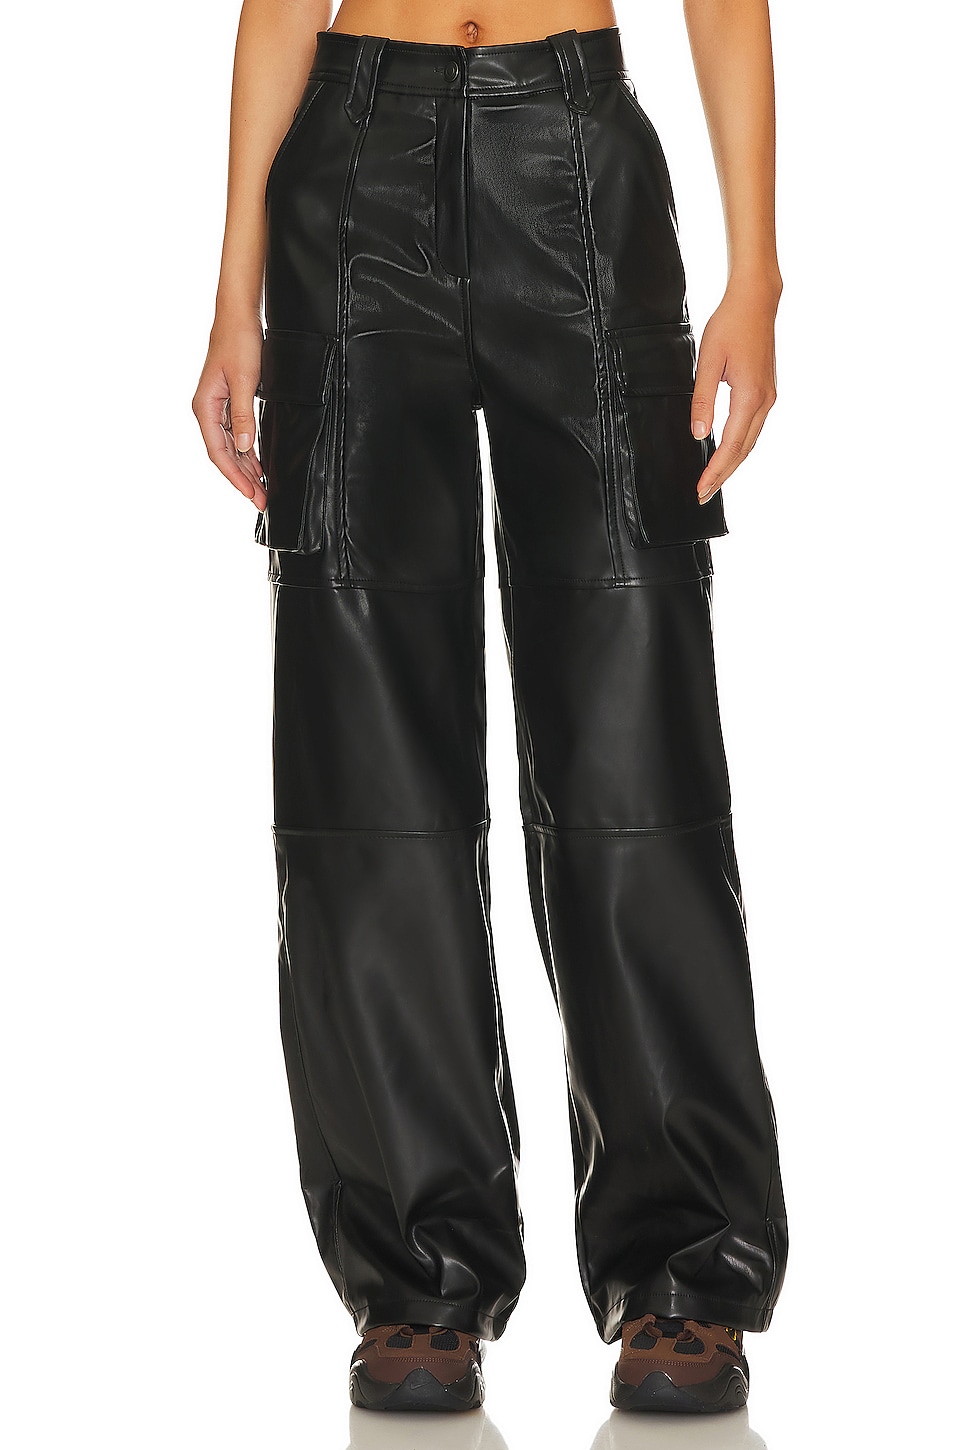 superdown Halley Faux Leather Pant in Black | REVOLVE